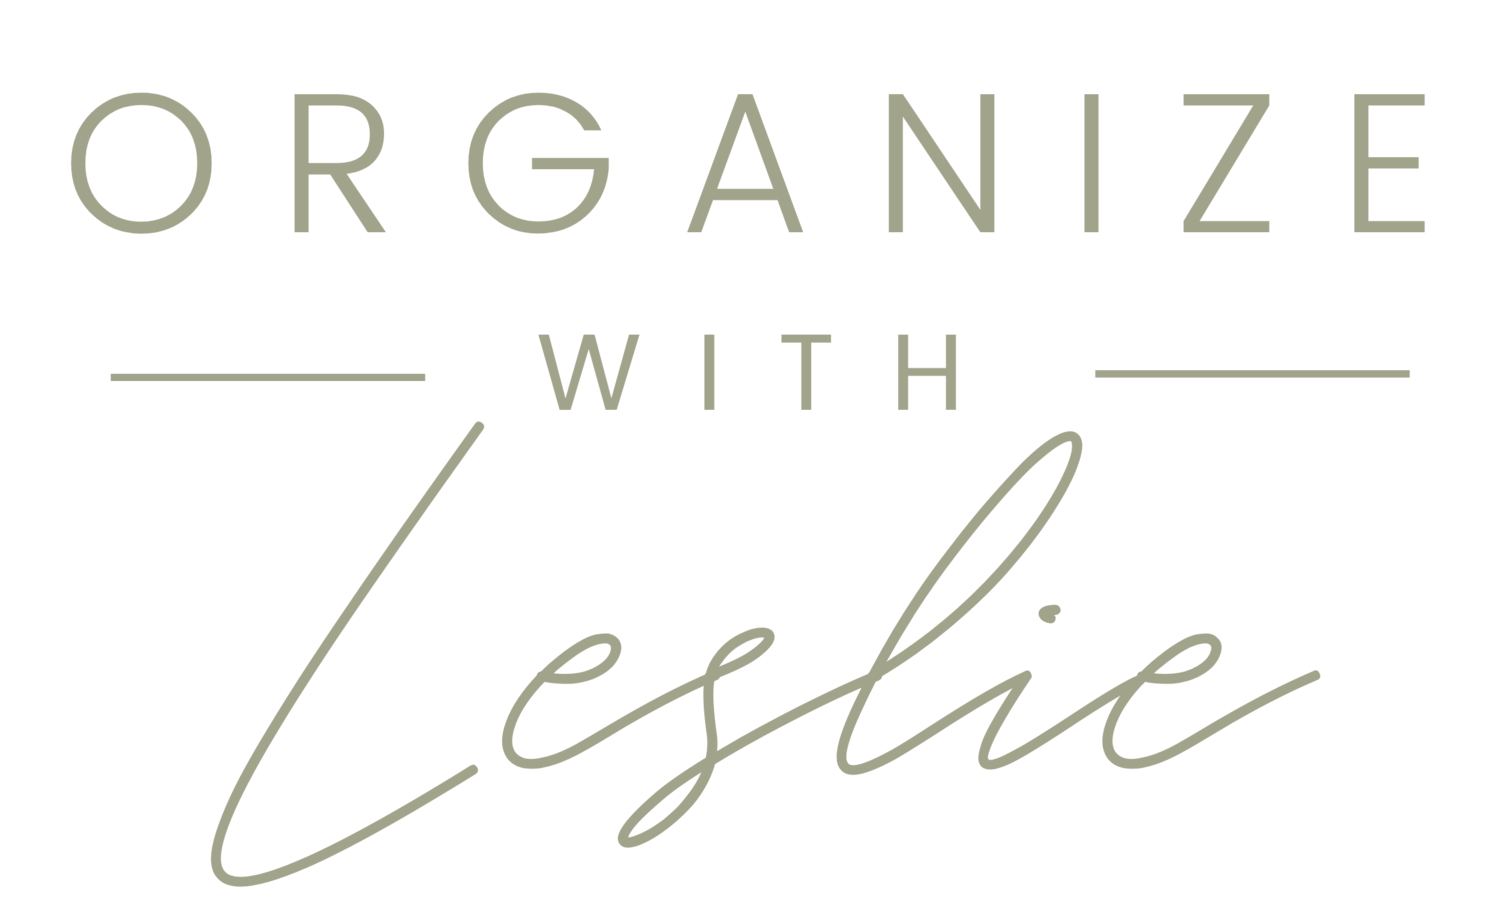 Organize with Leslie